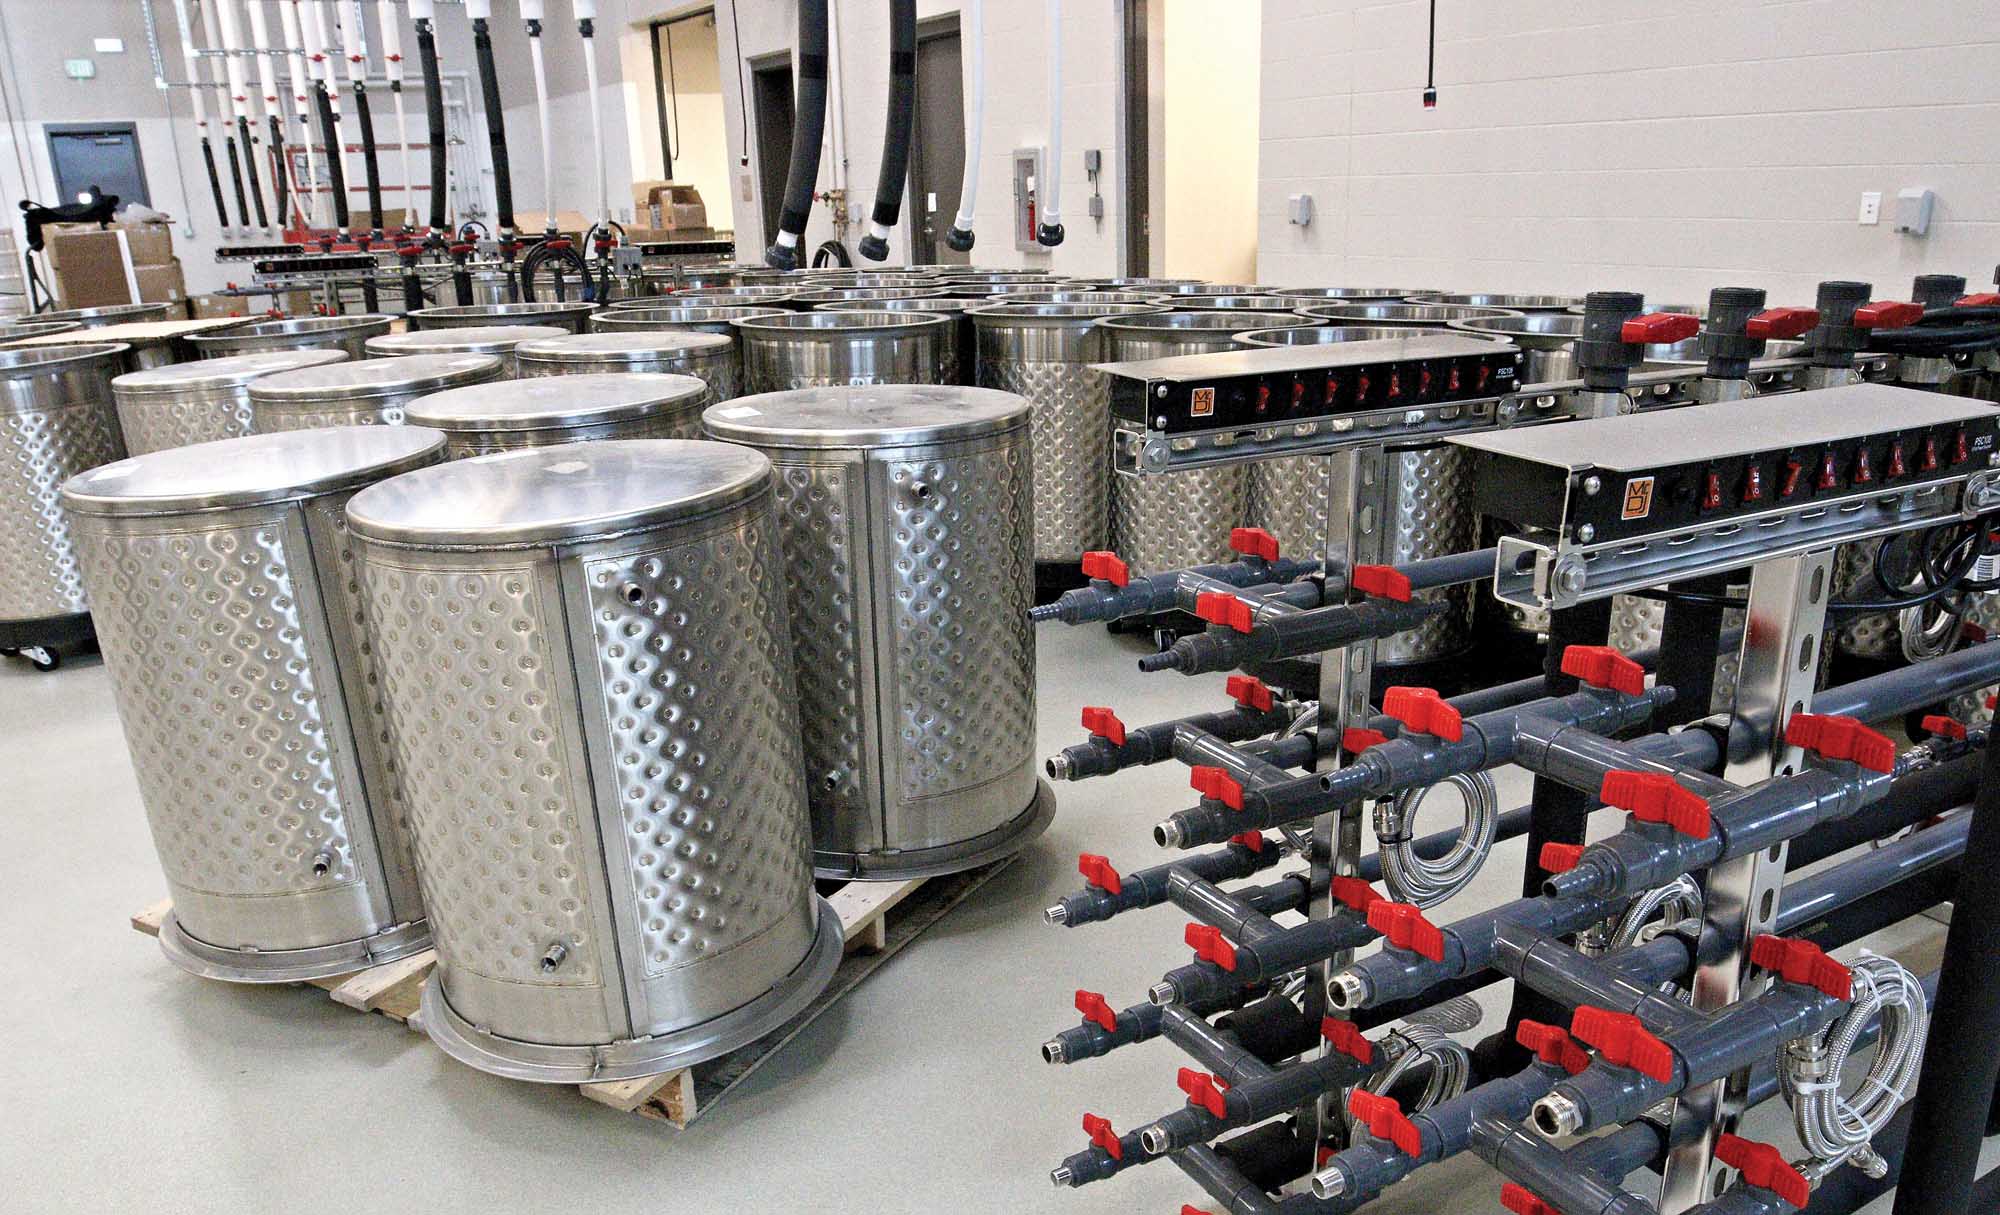 Some of the 192 climate-controlled, stainless steel research fermenters before they are assembled at the Washington State University Wine Science Center in Richland, Washington on May 4, 2015. (TJ Mullinax/Good Fruit Grower)